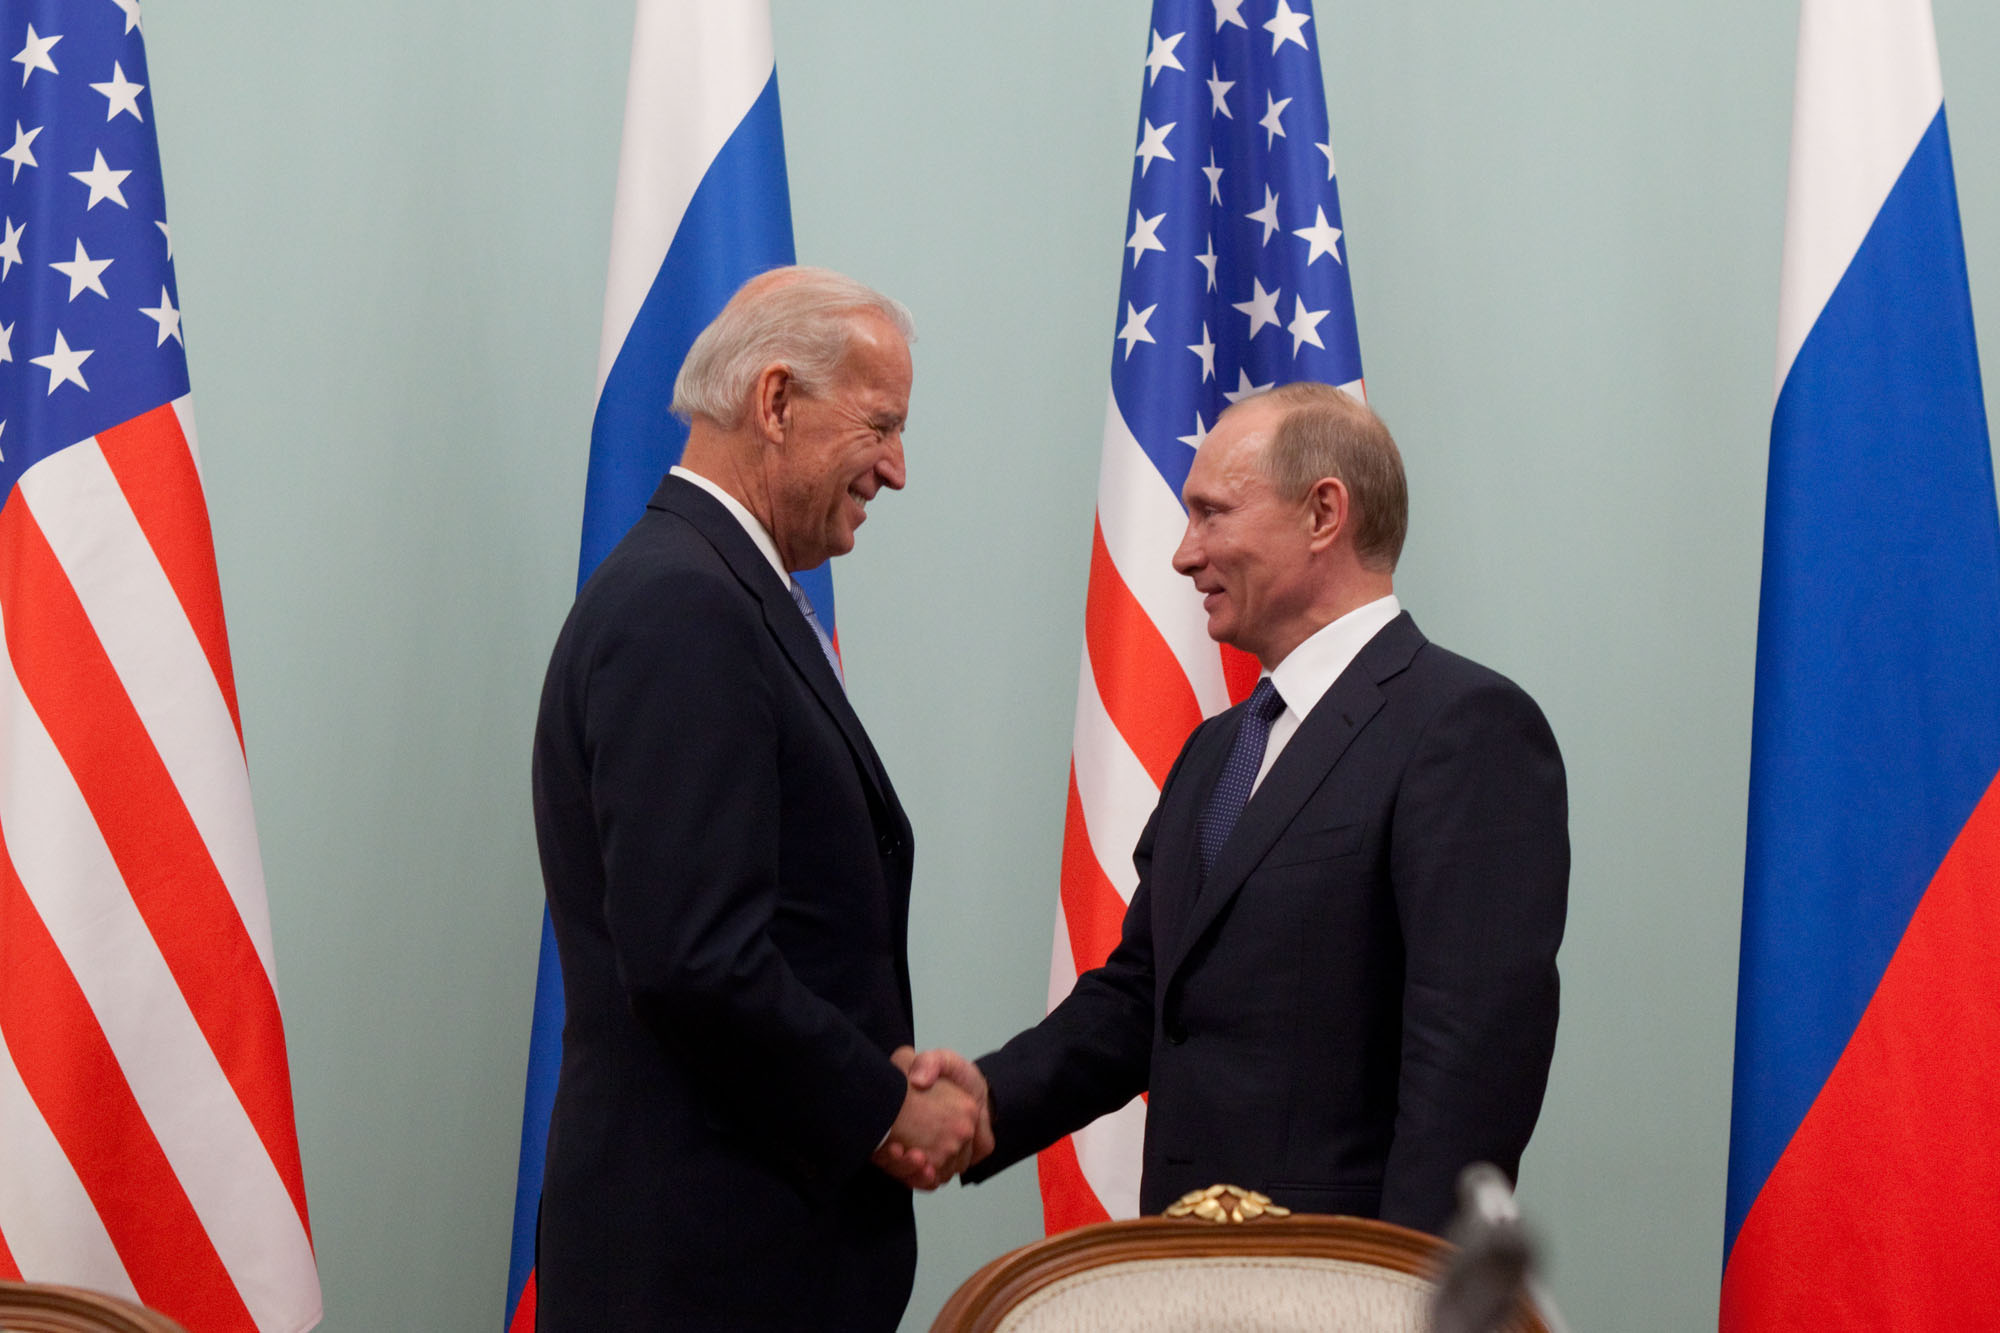 Small victories: Why US-Russia relations could improve under Biden – European Council on Foreign Relations